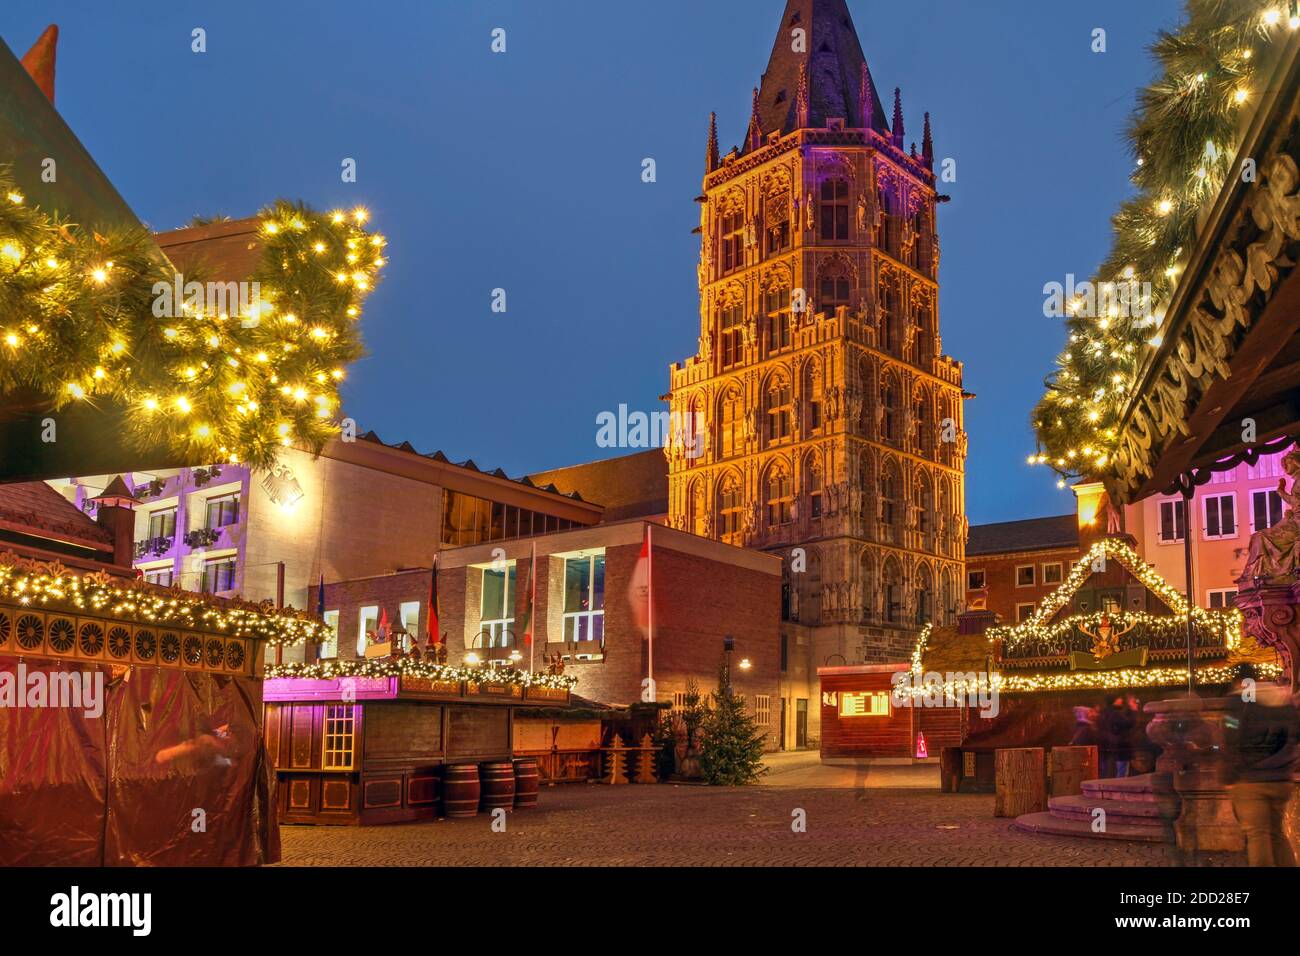 Night scene in Rathausplatz in Cologne, Germany during Christmas time, featuring the Christmas market and the tower of the Town Hall. Stock Photo